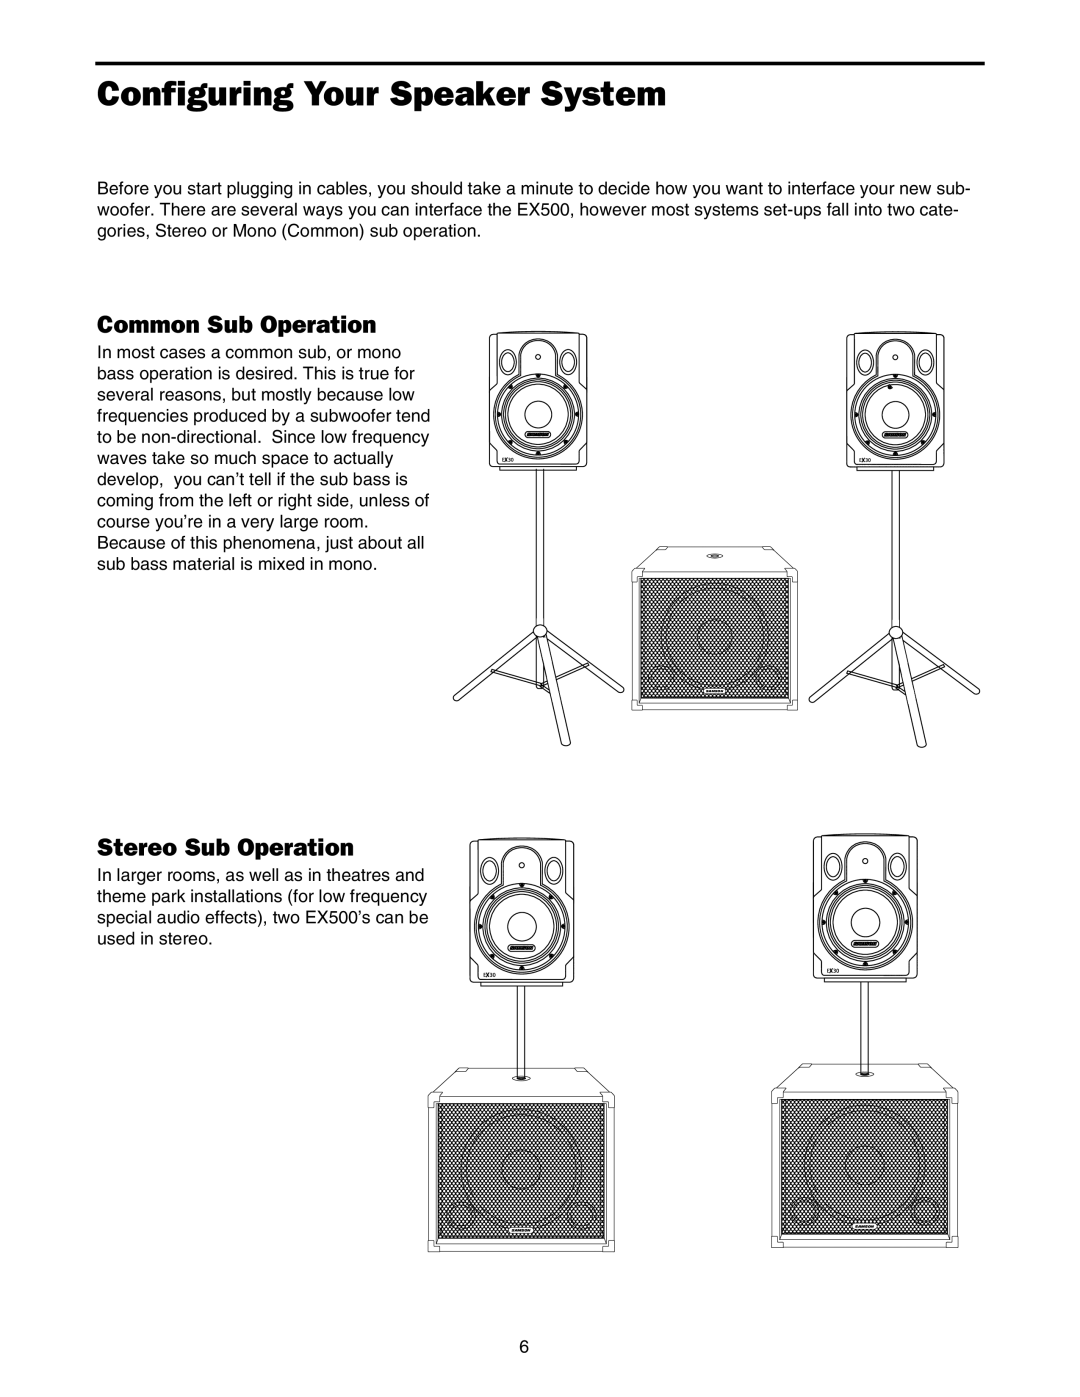 Samson EX500 owner manual Configuring Your Speaker System, Common Sub Operation, Stereo Sub Operation 